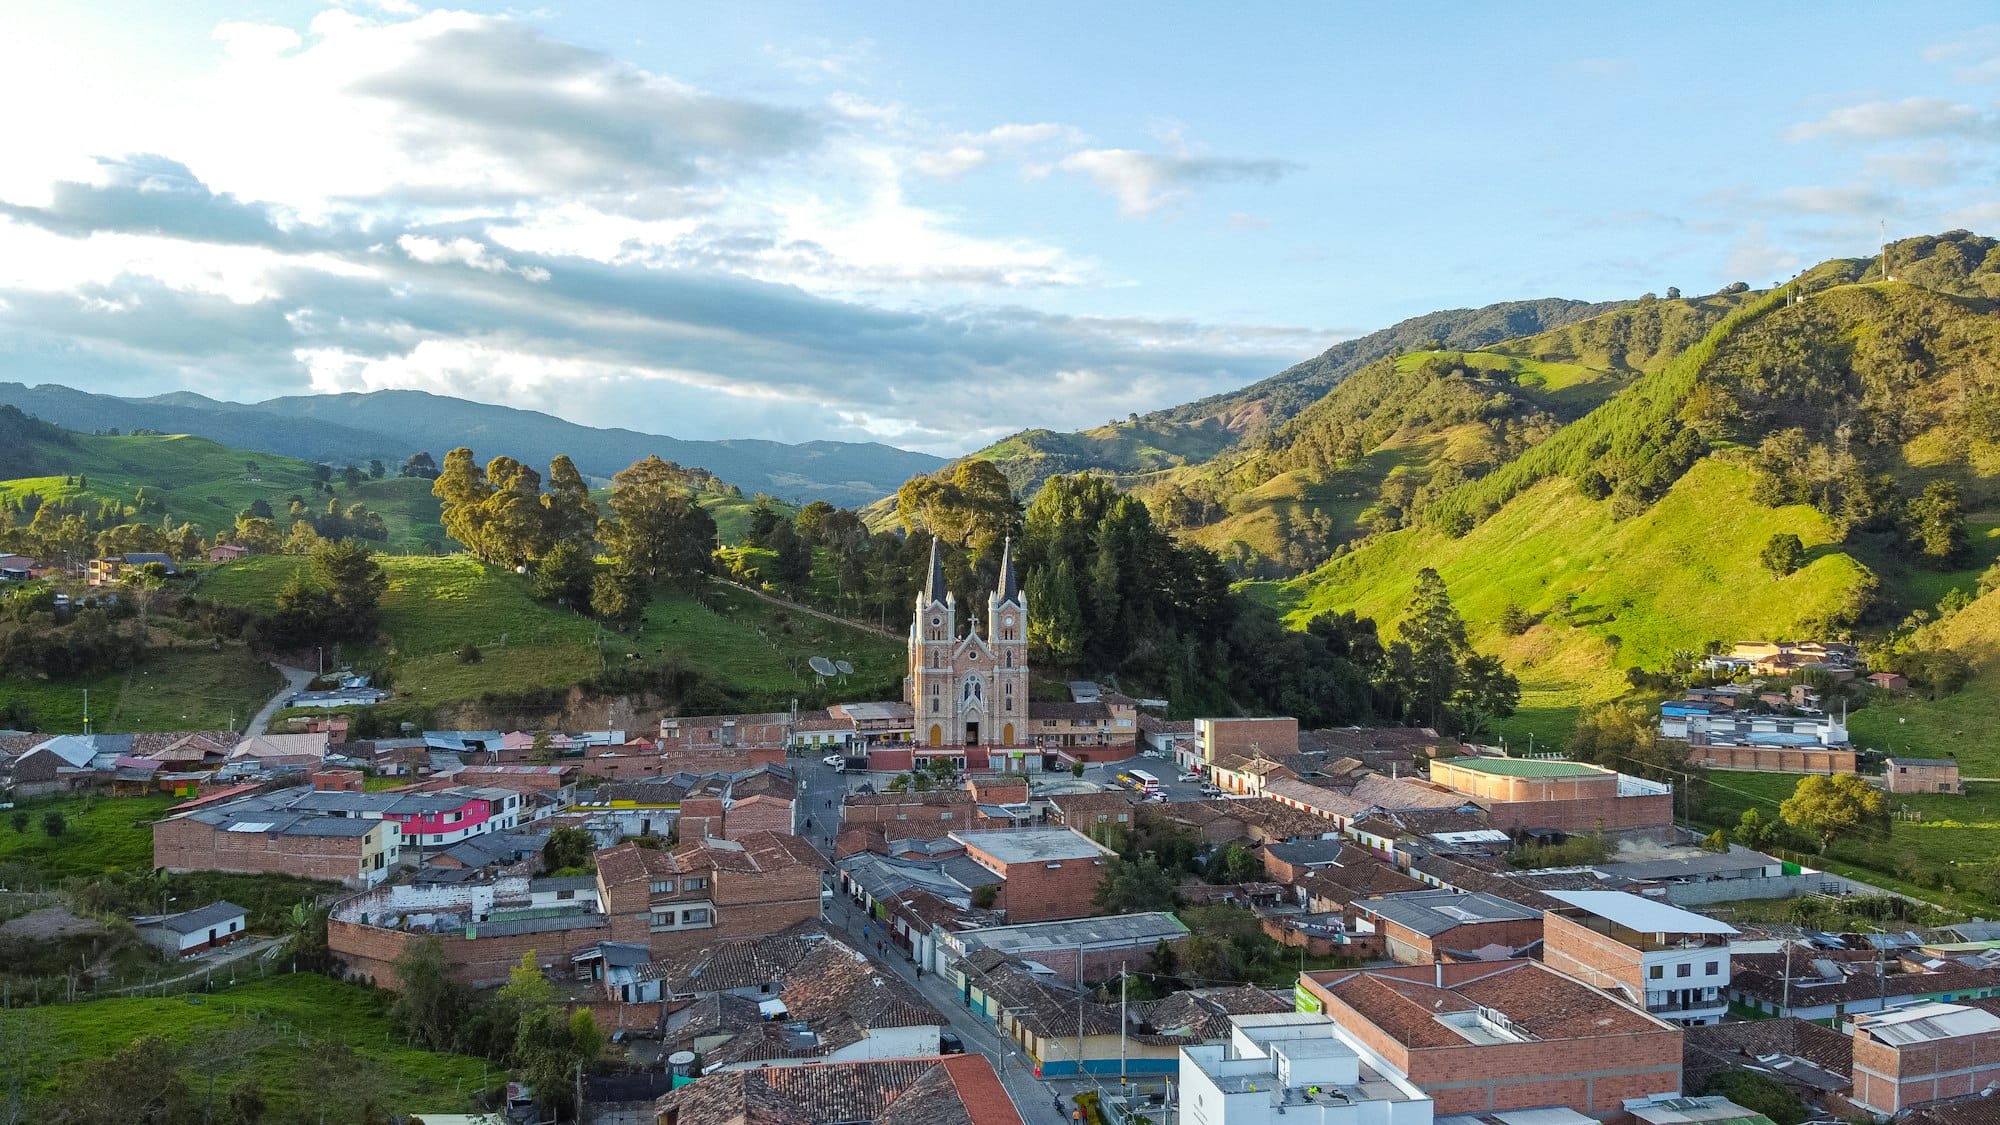 Typical Antioquia Village with Big Catedral